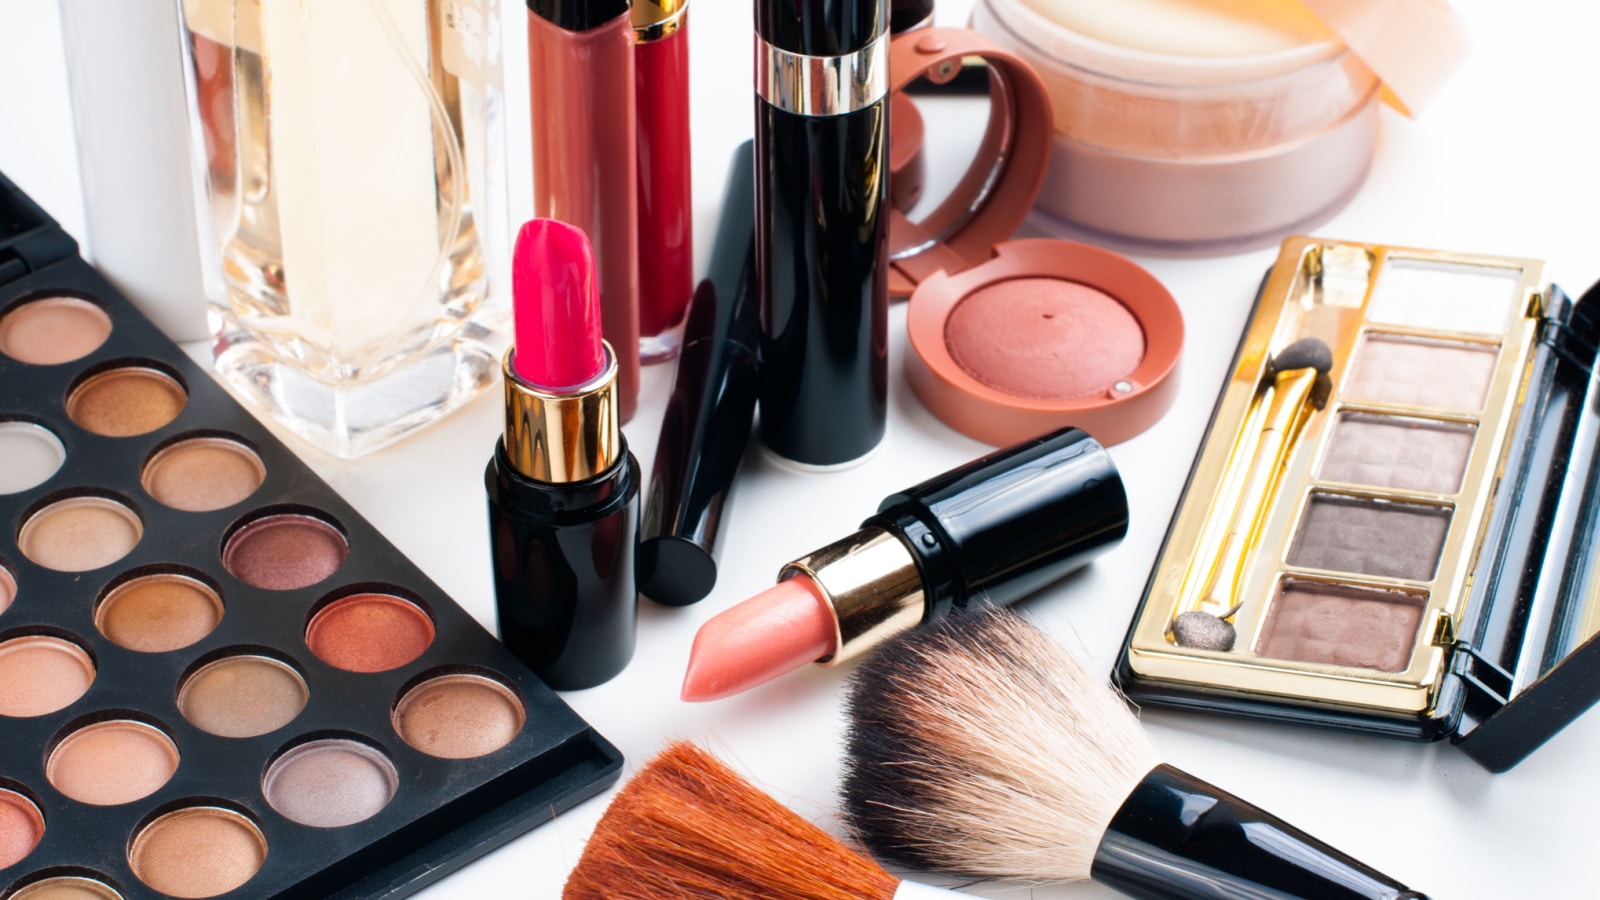 12 Stores Like Sephora to Shop for All Your Beauty Needs